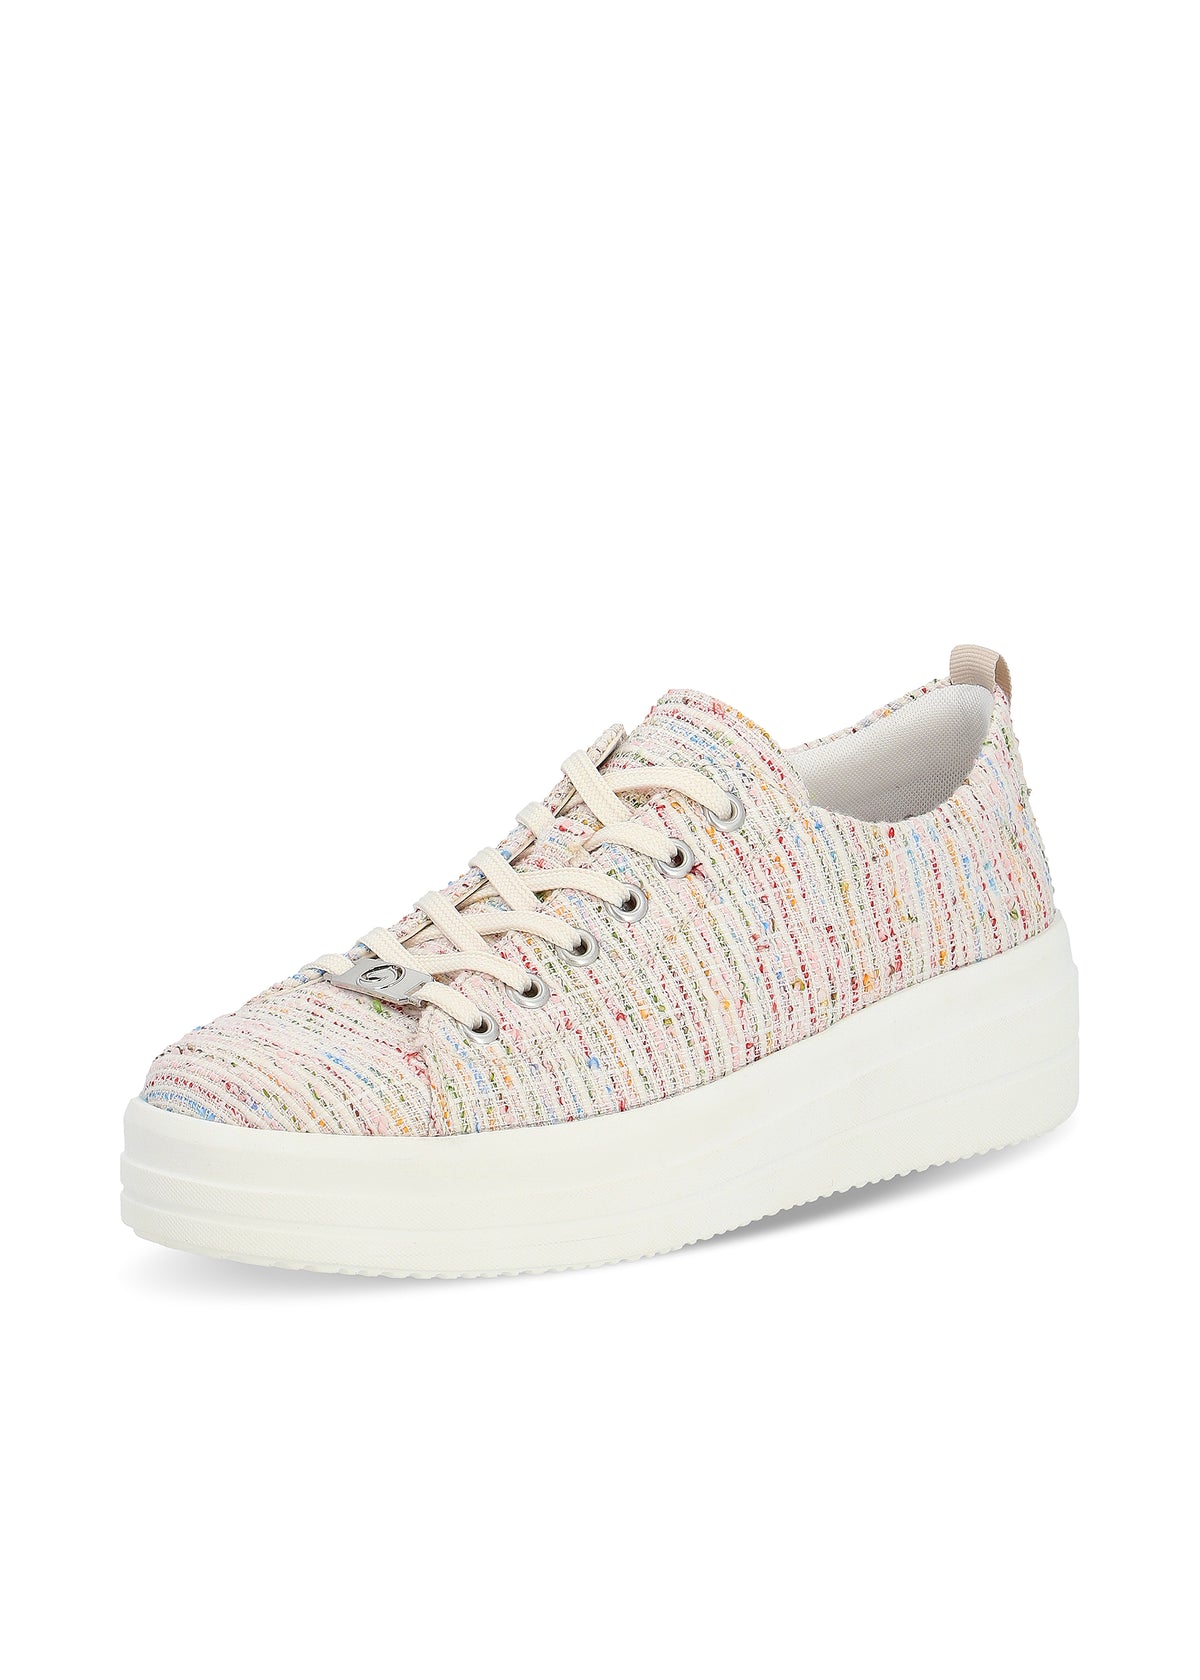 Sneakers with a thick sole - light-colored fabric surface